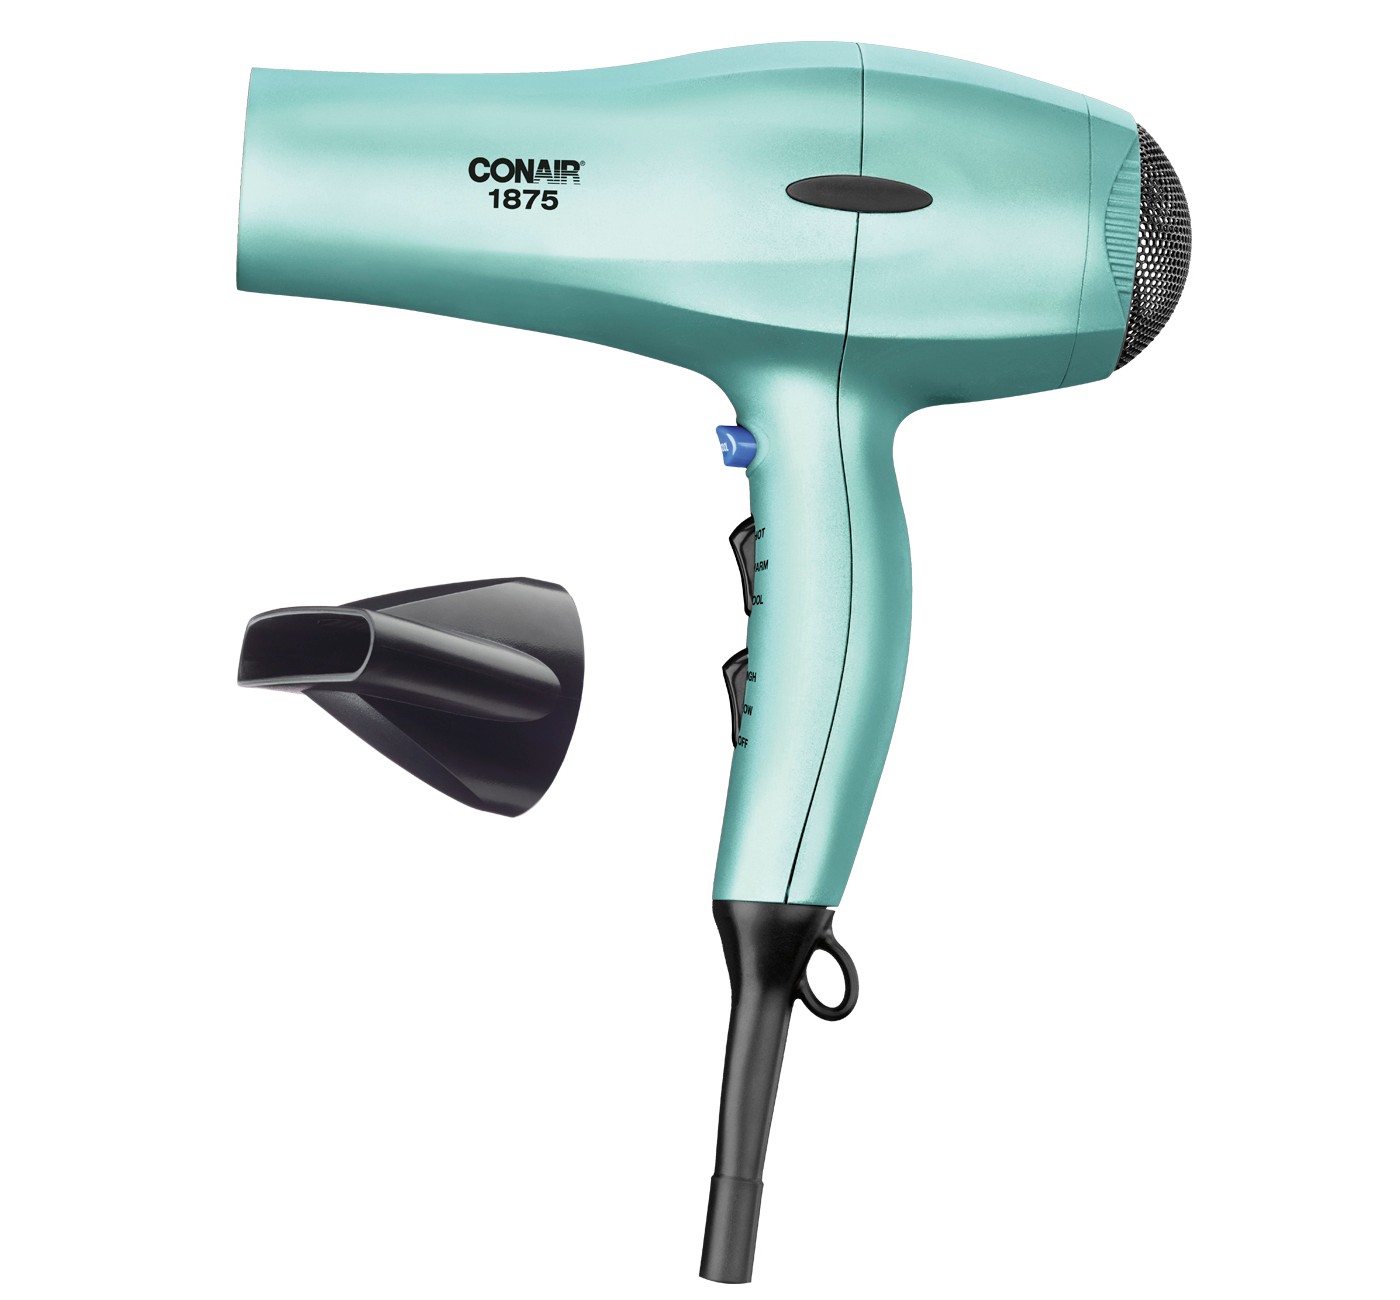 In-store: Conair soft touch dryer for $9